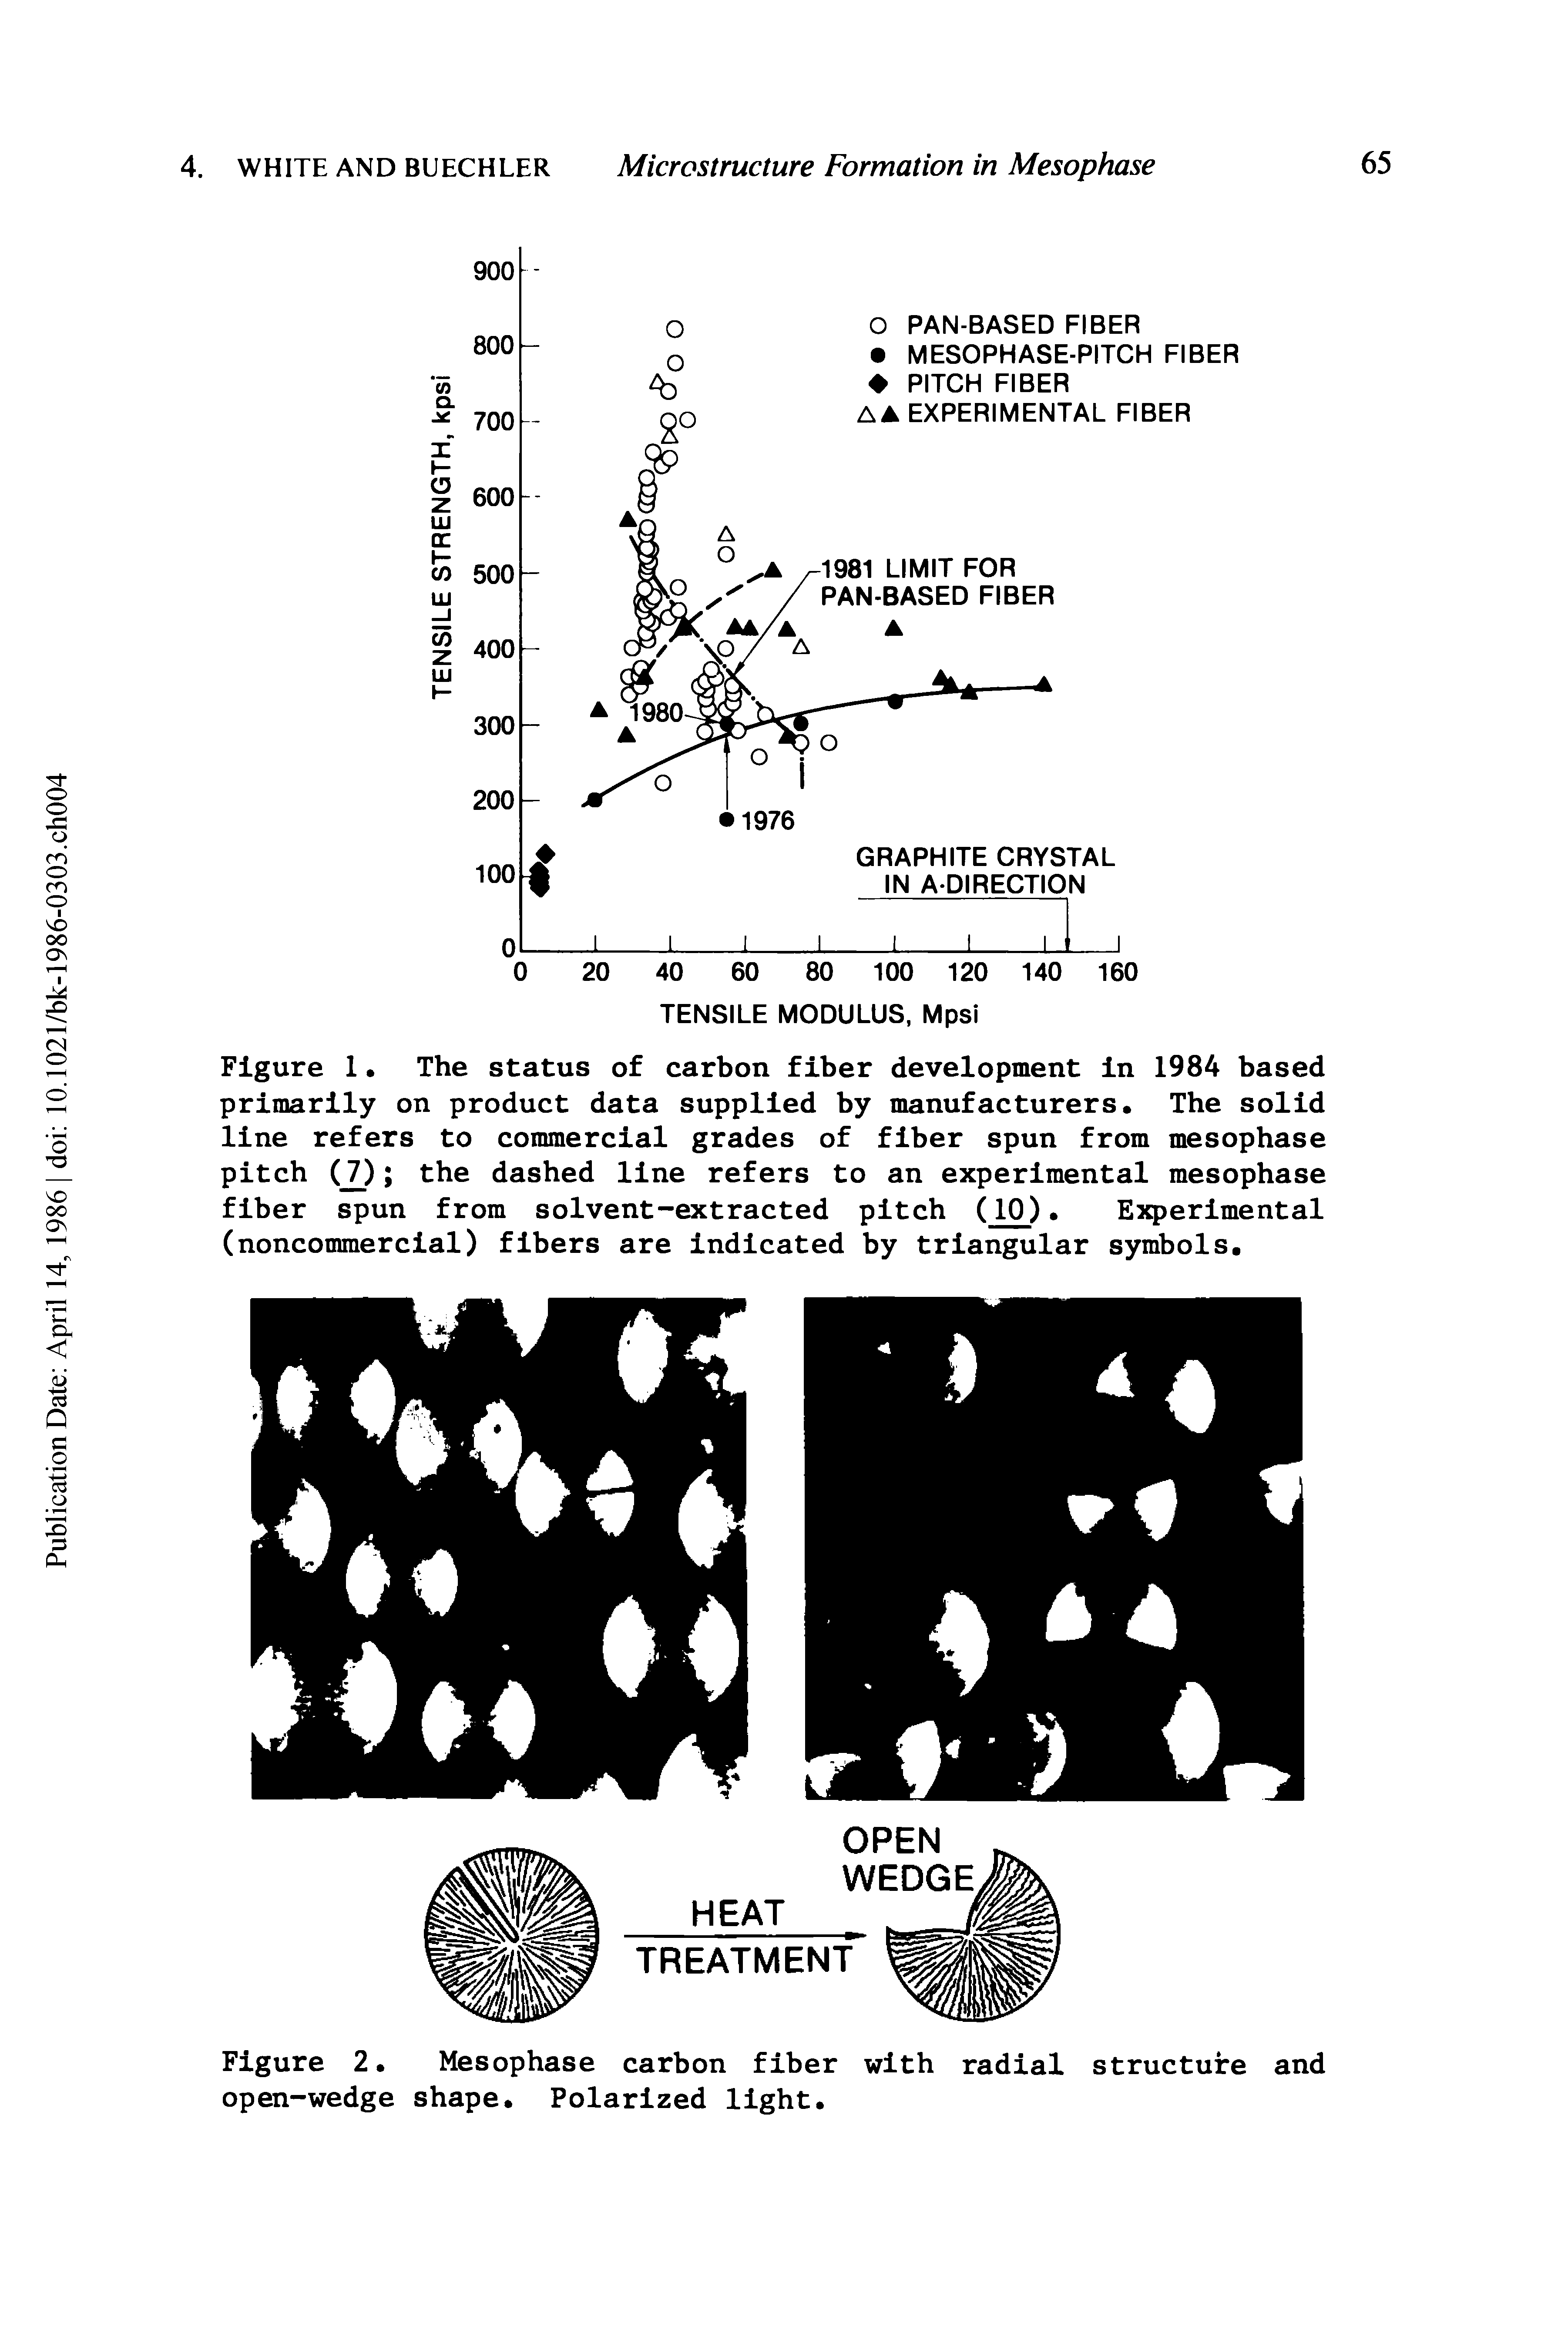 Figure 1 The status of carbon fiber development in 1984 based primarily on product data supplied by manufacturers. The solid line refers to commercial grades of fiber spun from mesophase pitch ( 7) the dashed line refers to an experimental mesophase fiber spun from solvent-extracted pitch (10). Experimental (noncommercial) fibers are indicated by triangular symbols.